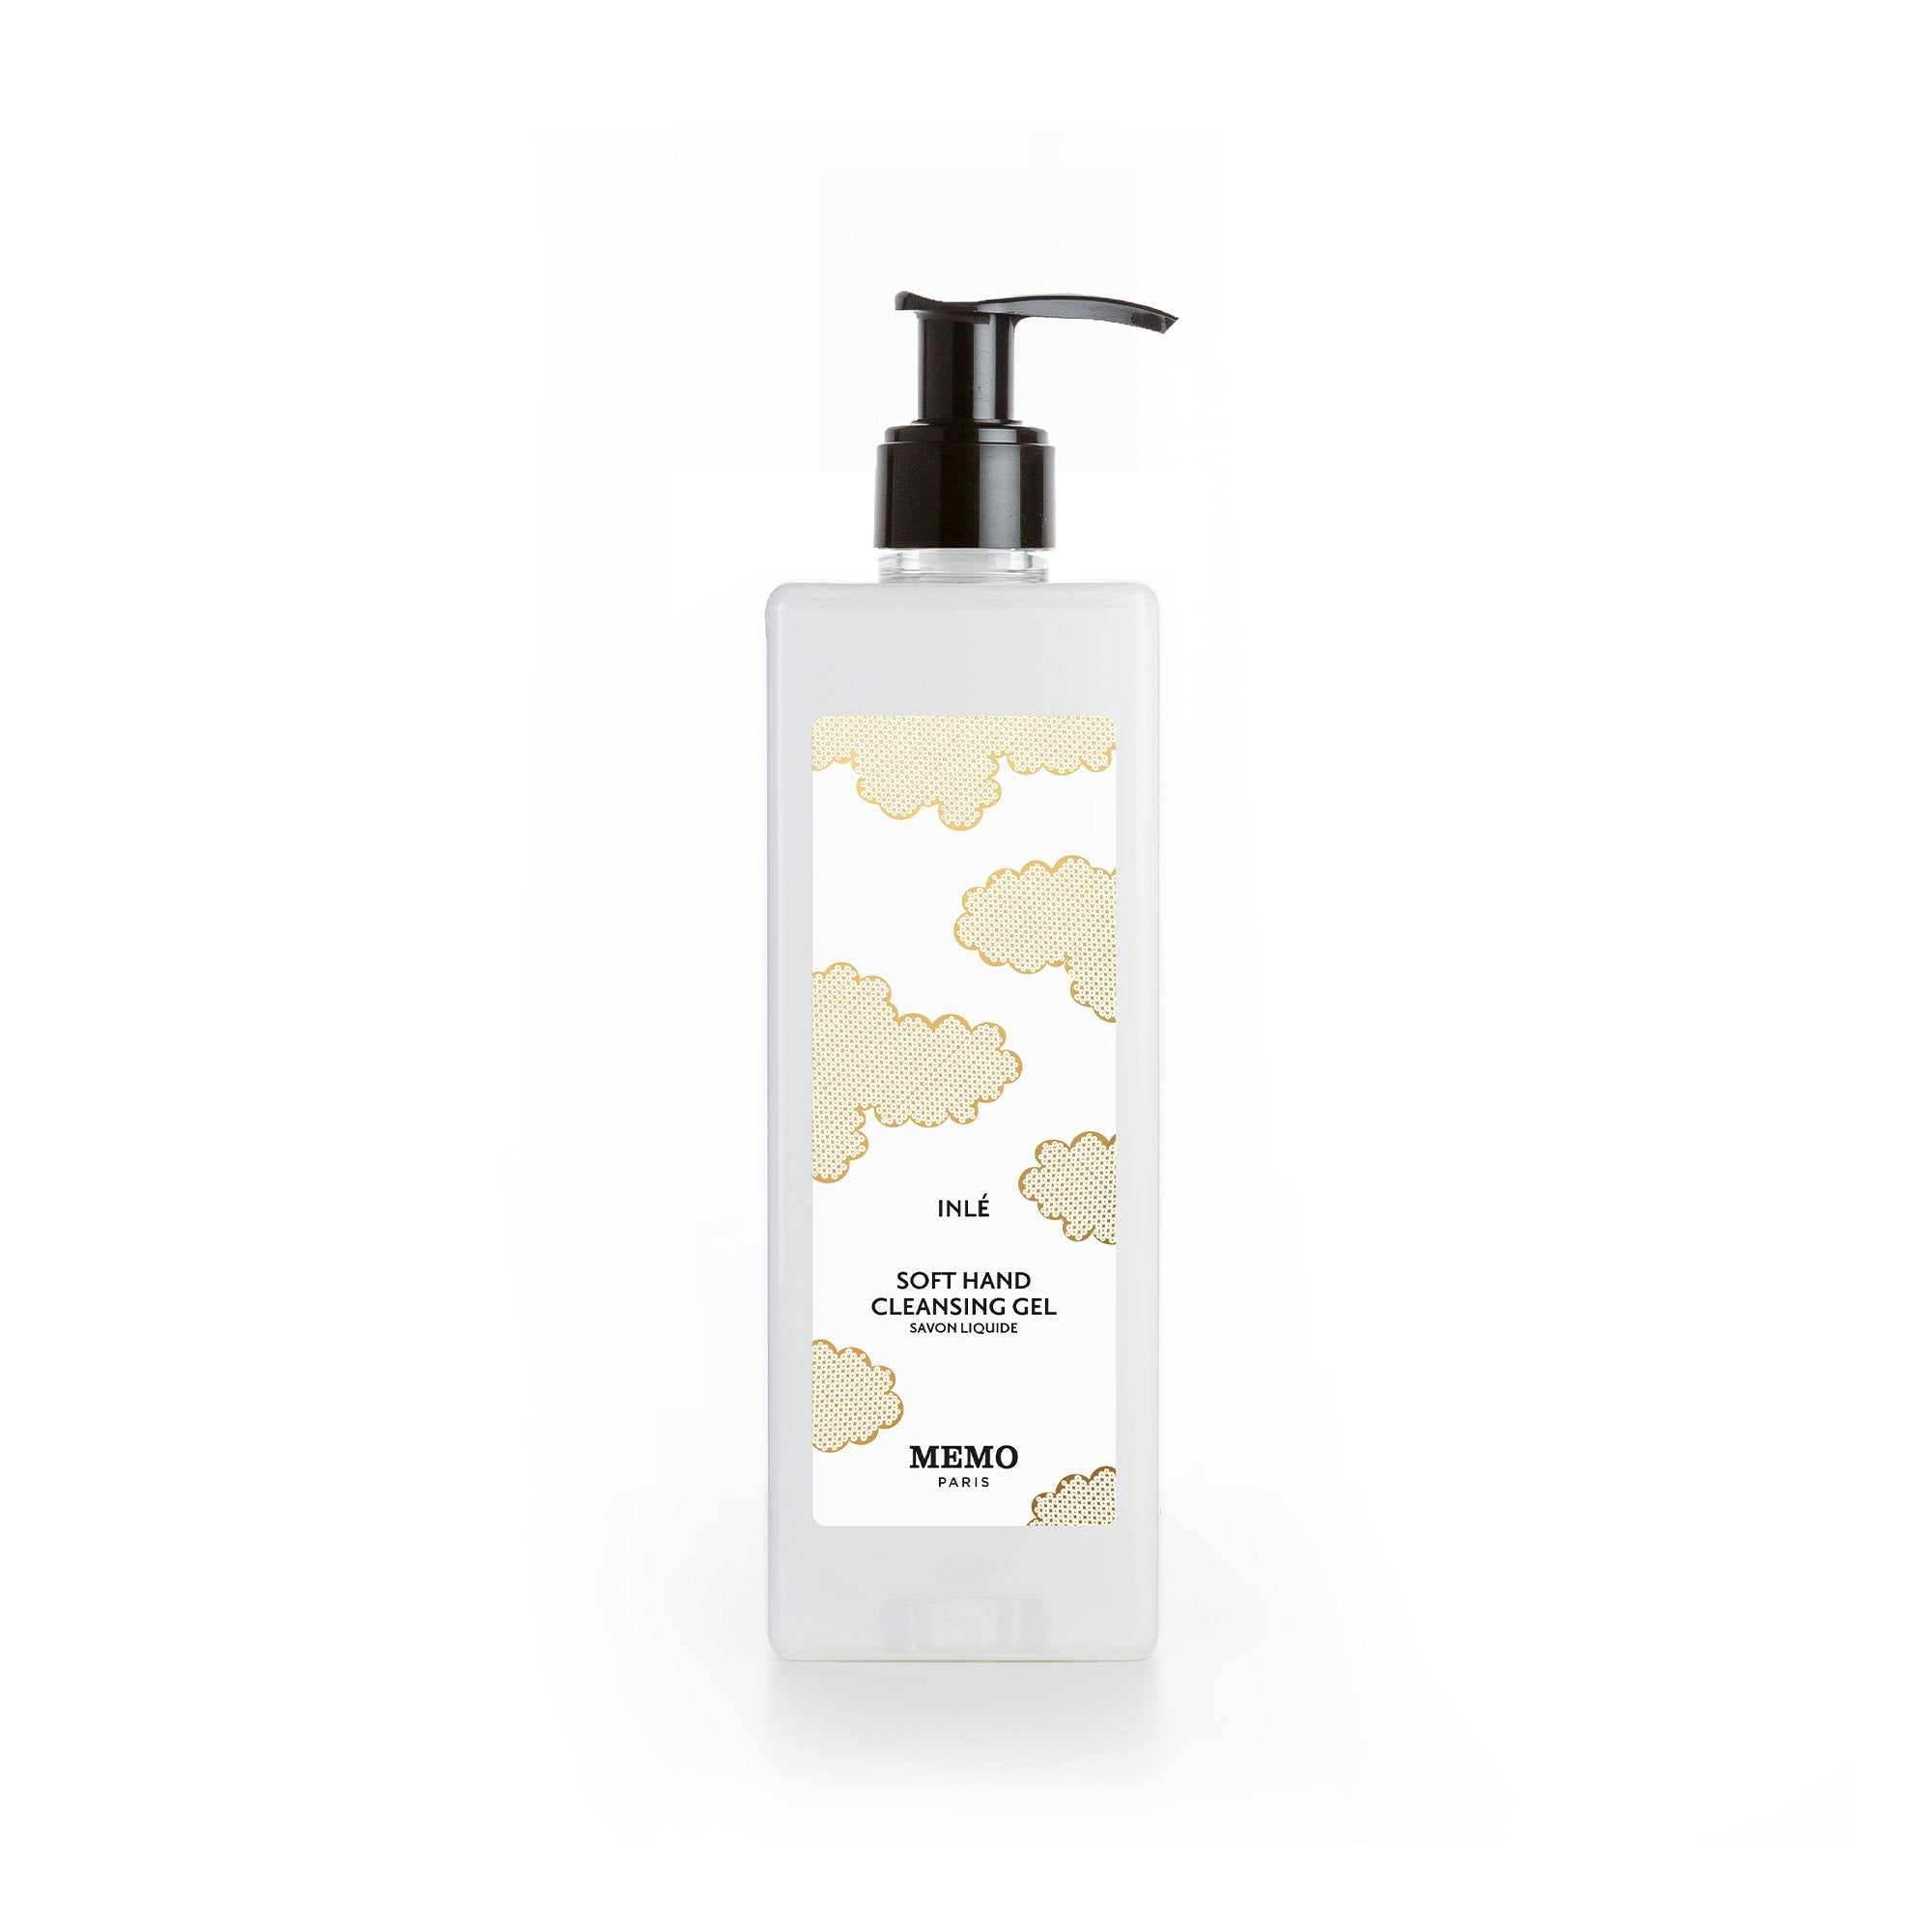 Memo "Inlé" Soft Hand Cleansing Gel With Locked Pump (480 ml) 